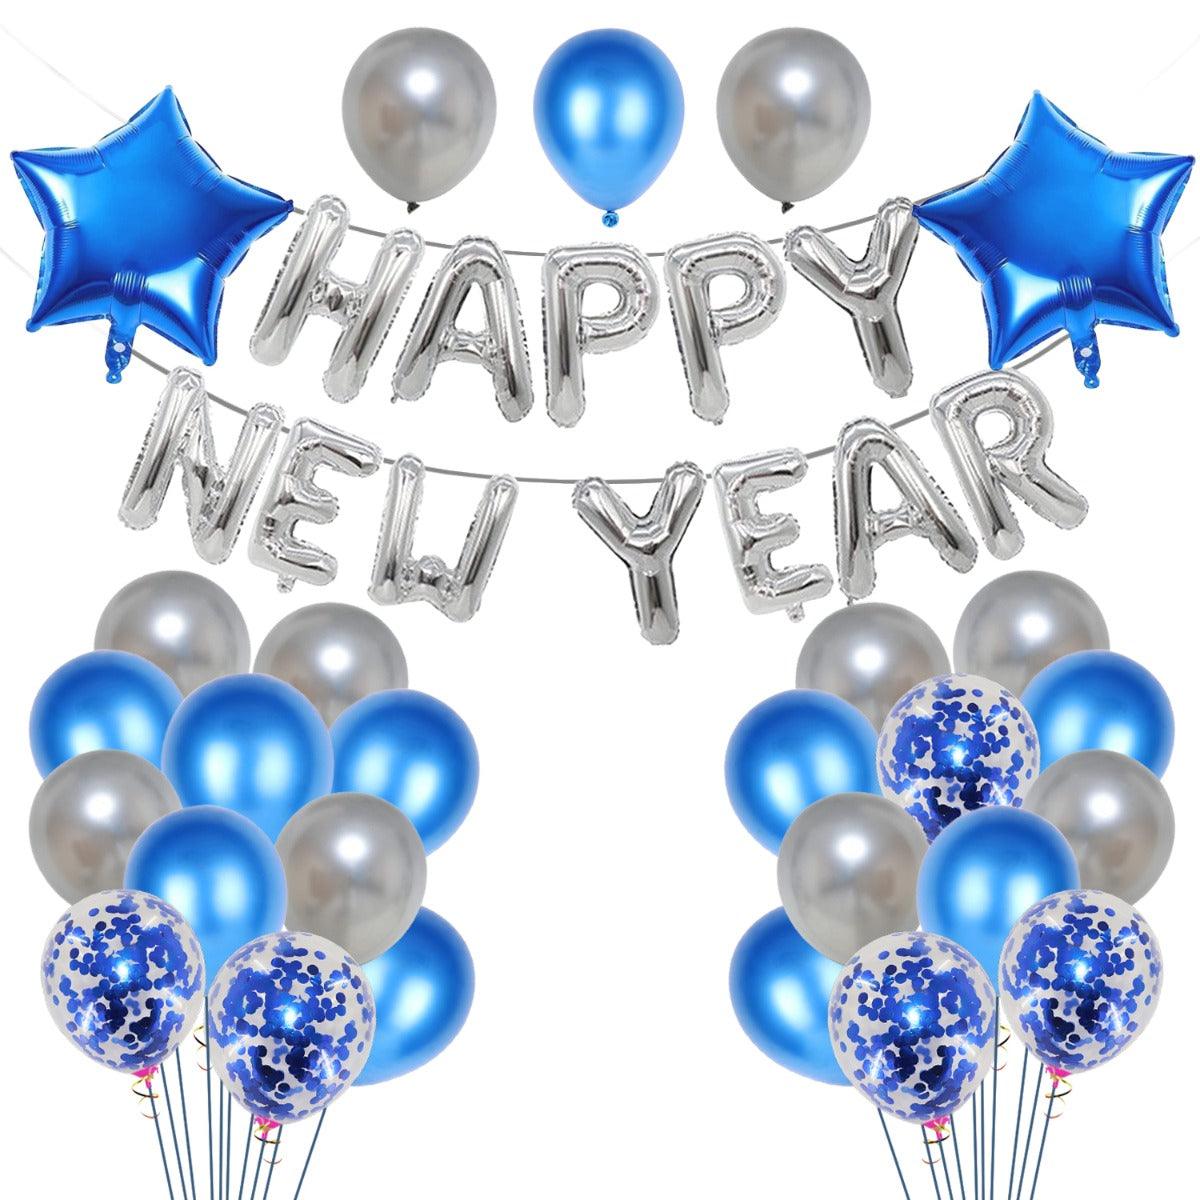 PartyCorp New Year Decoration Kit Combo 32 Pcs - Silver, Blue Chrome Balloon, Blue Confetti, Silver Happy New Year Foil Banner, Blue Star Foil Balloon